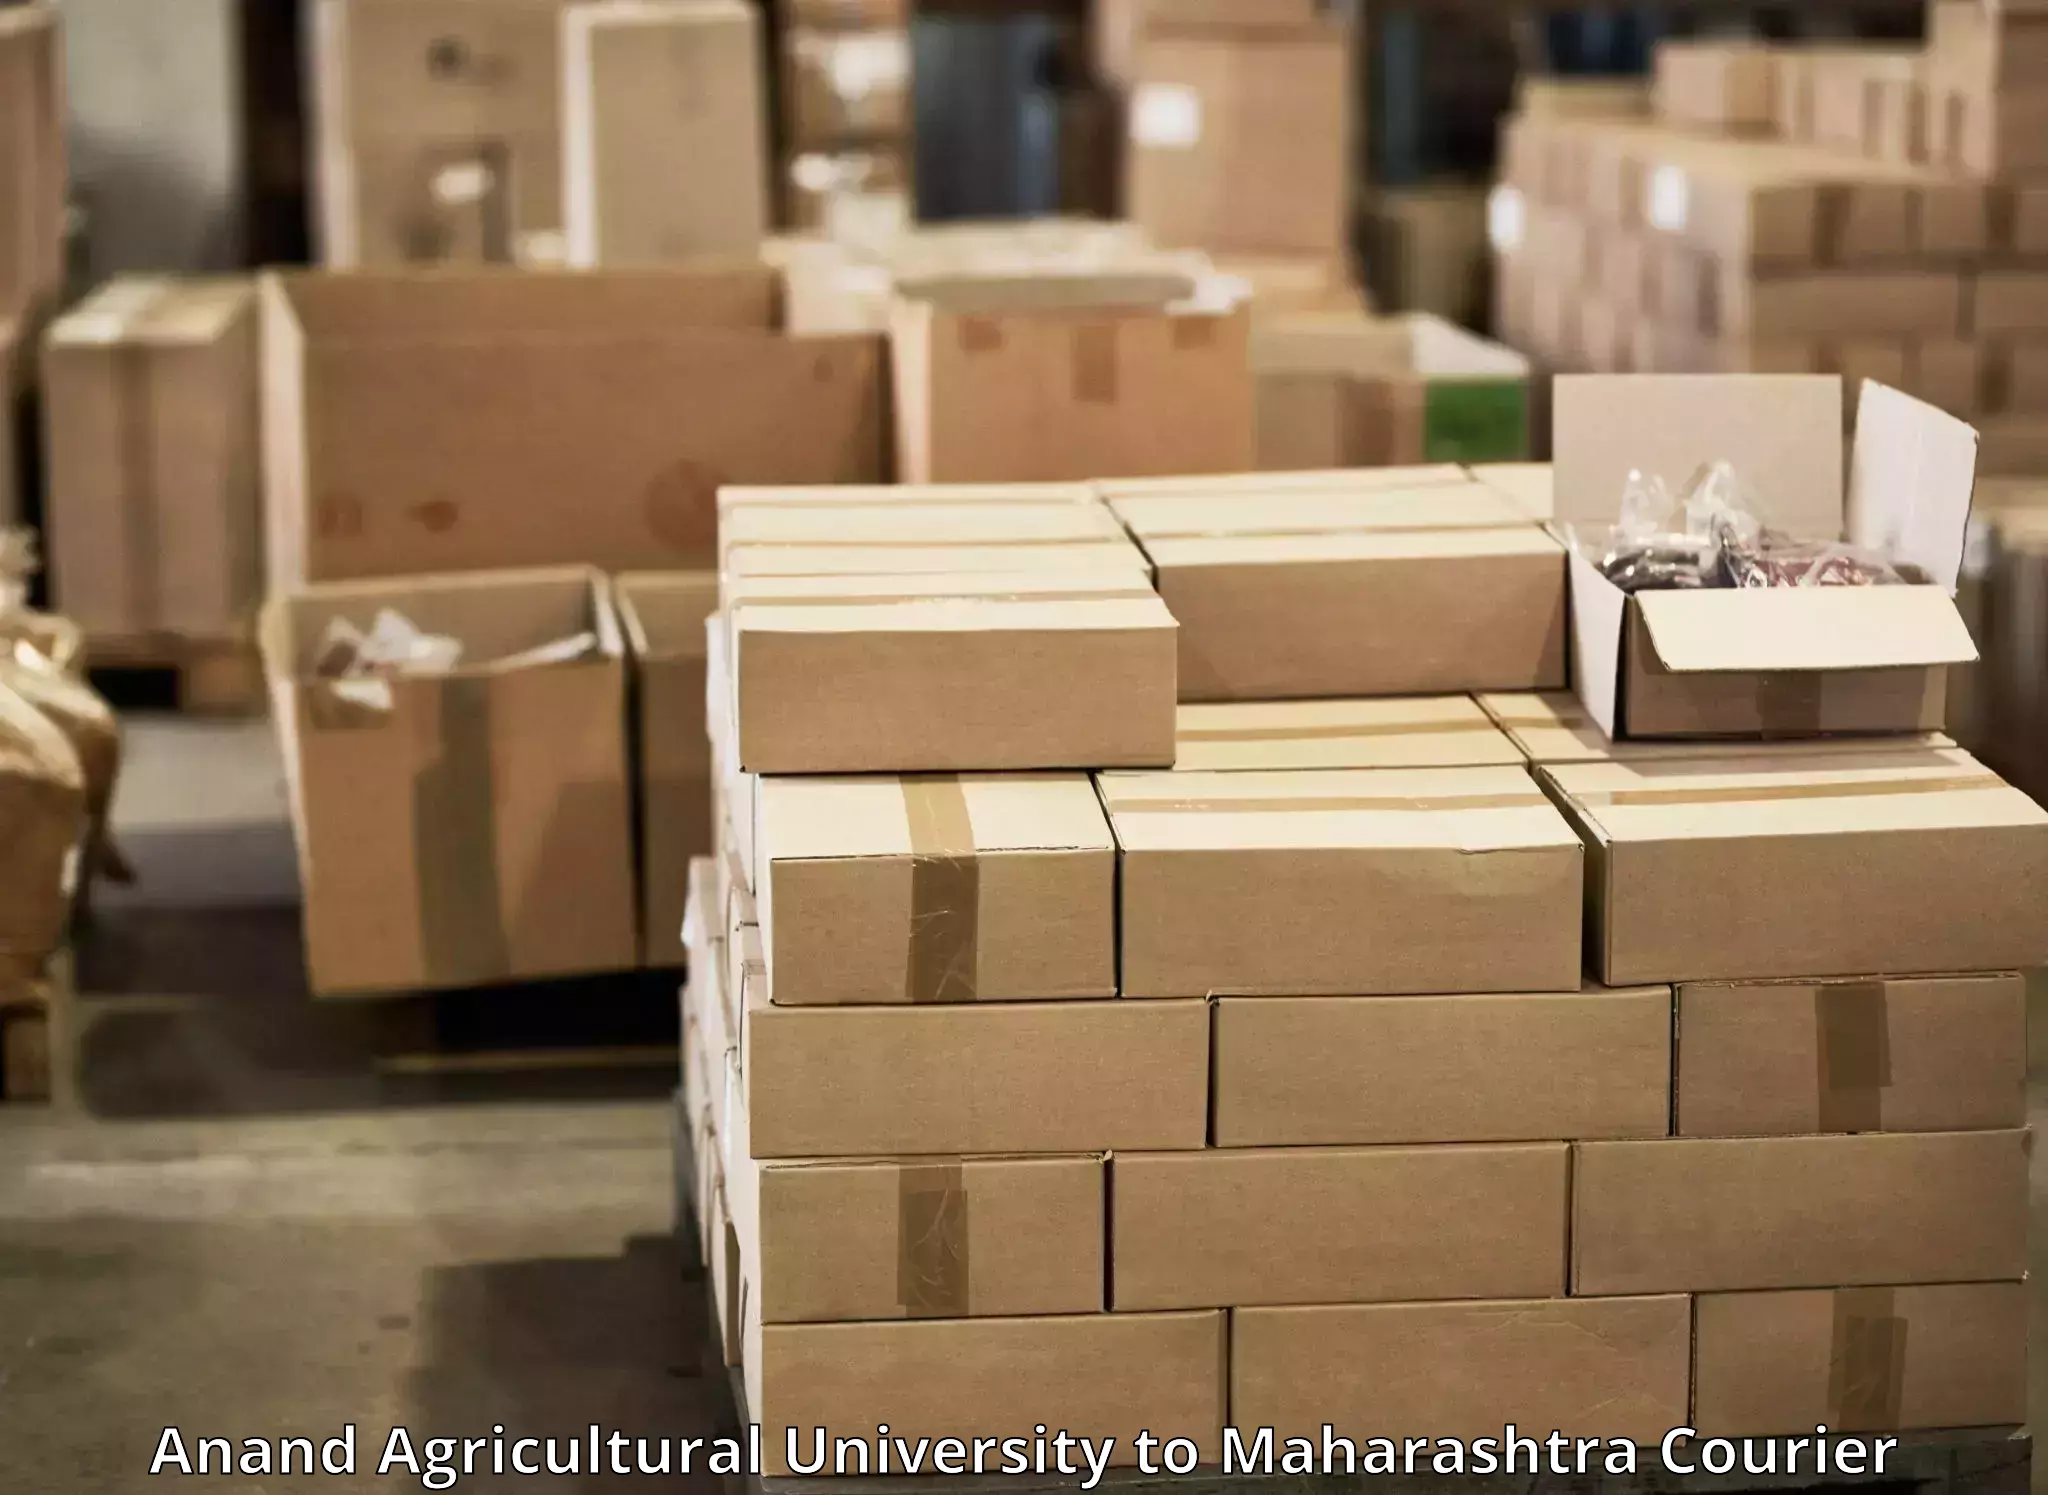 Cross-border shipping Anand Agricultural University to Ahmednagar